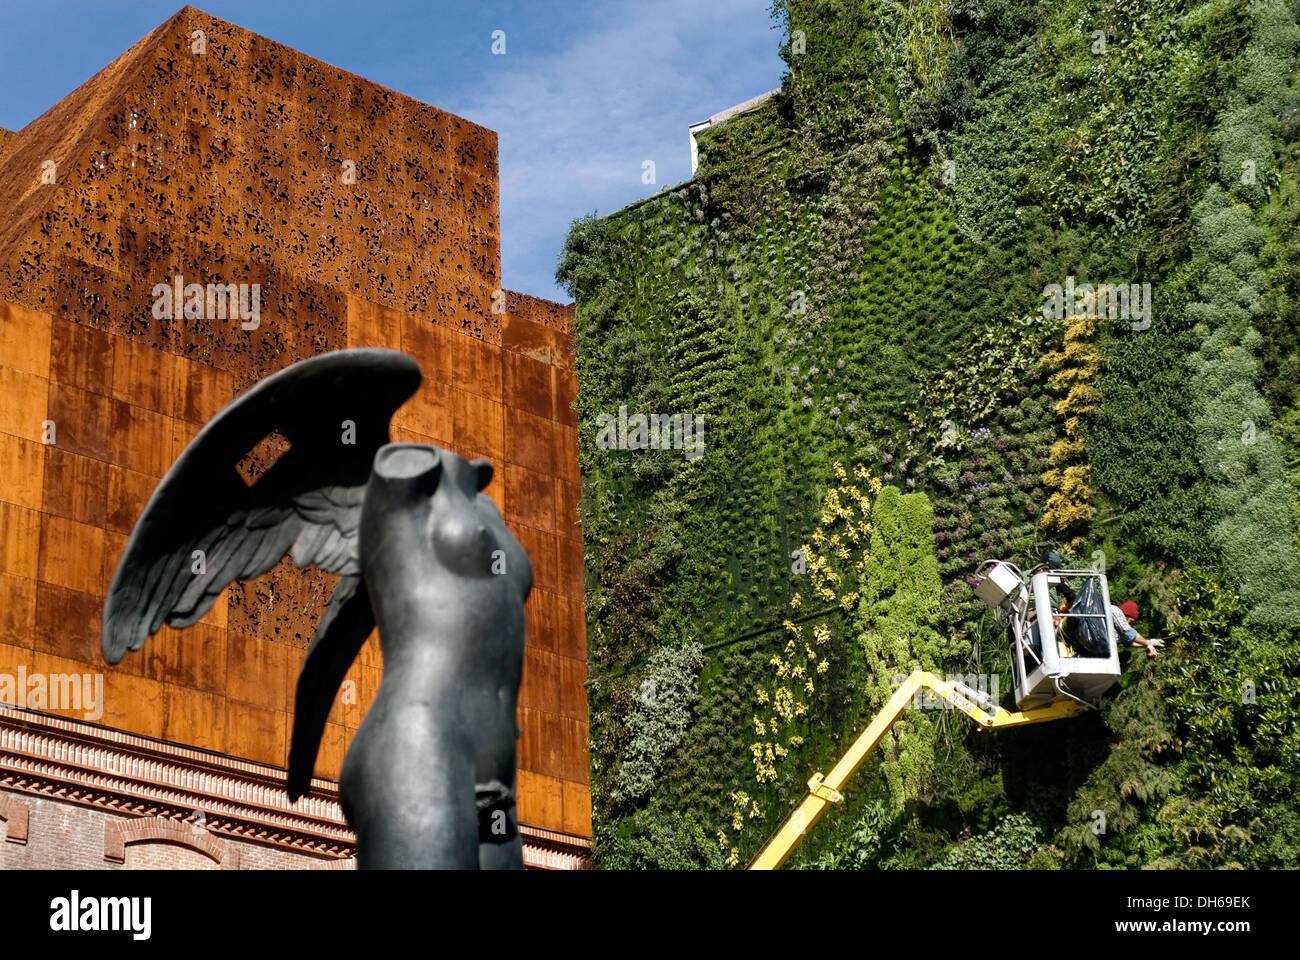 Caixa Forum, by the architects Herzog & de Meuron, with sculpture by sculptor Igor Mitoraj and worker in the vertical garden by Stock Photo